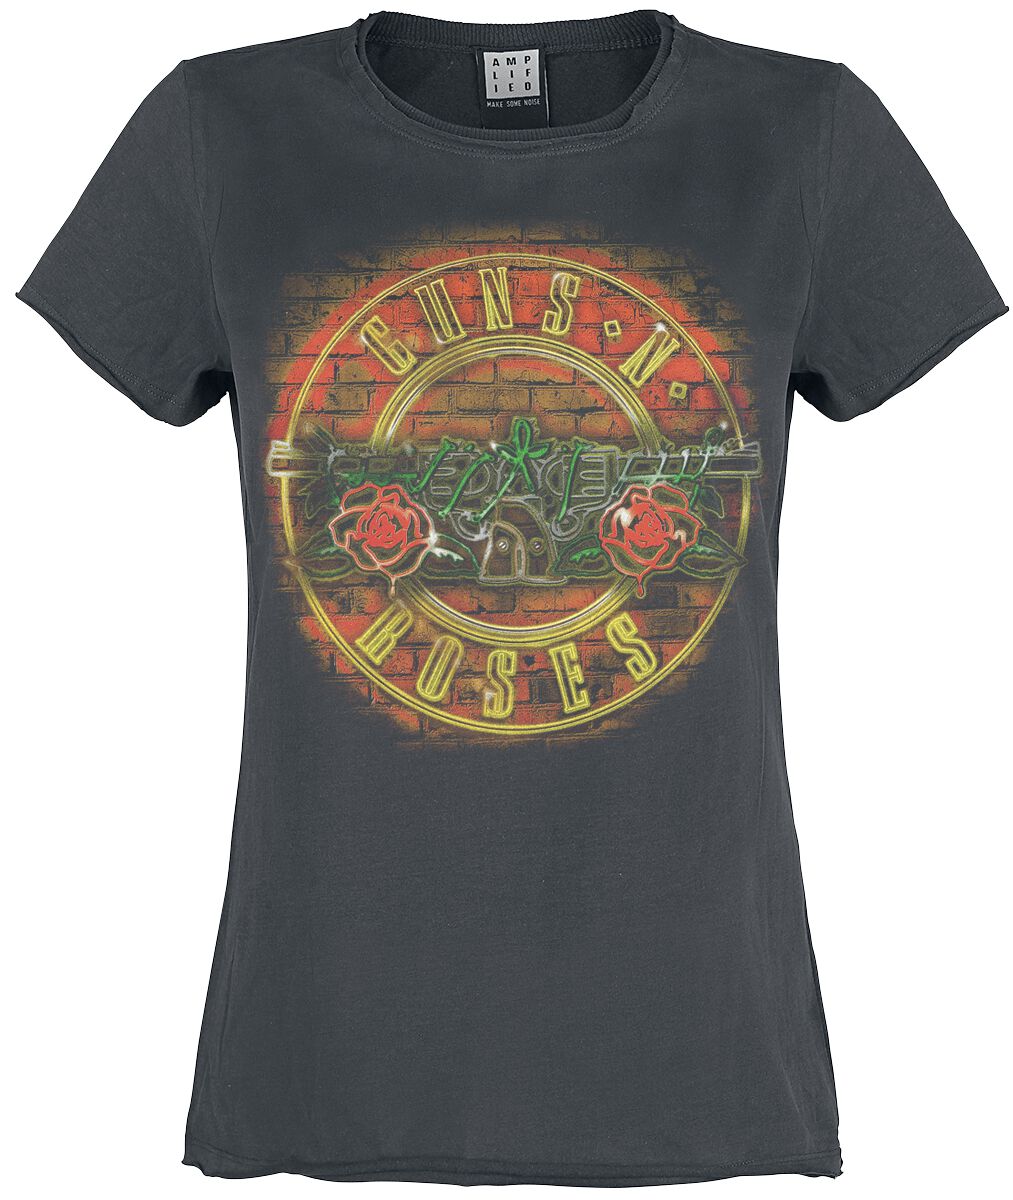 Image of Guns N' Roses Amplified Collection - Neon Sign Girl-Shirt charcoal